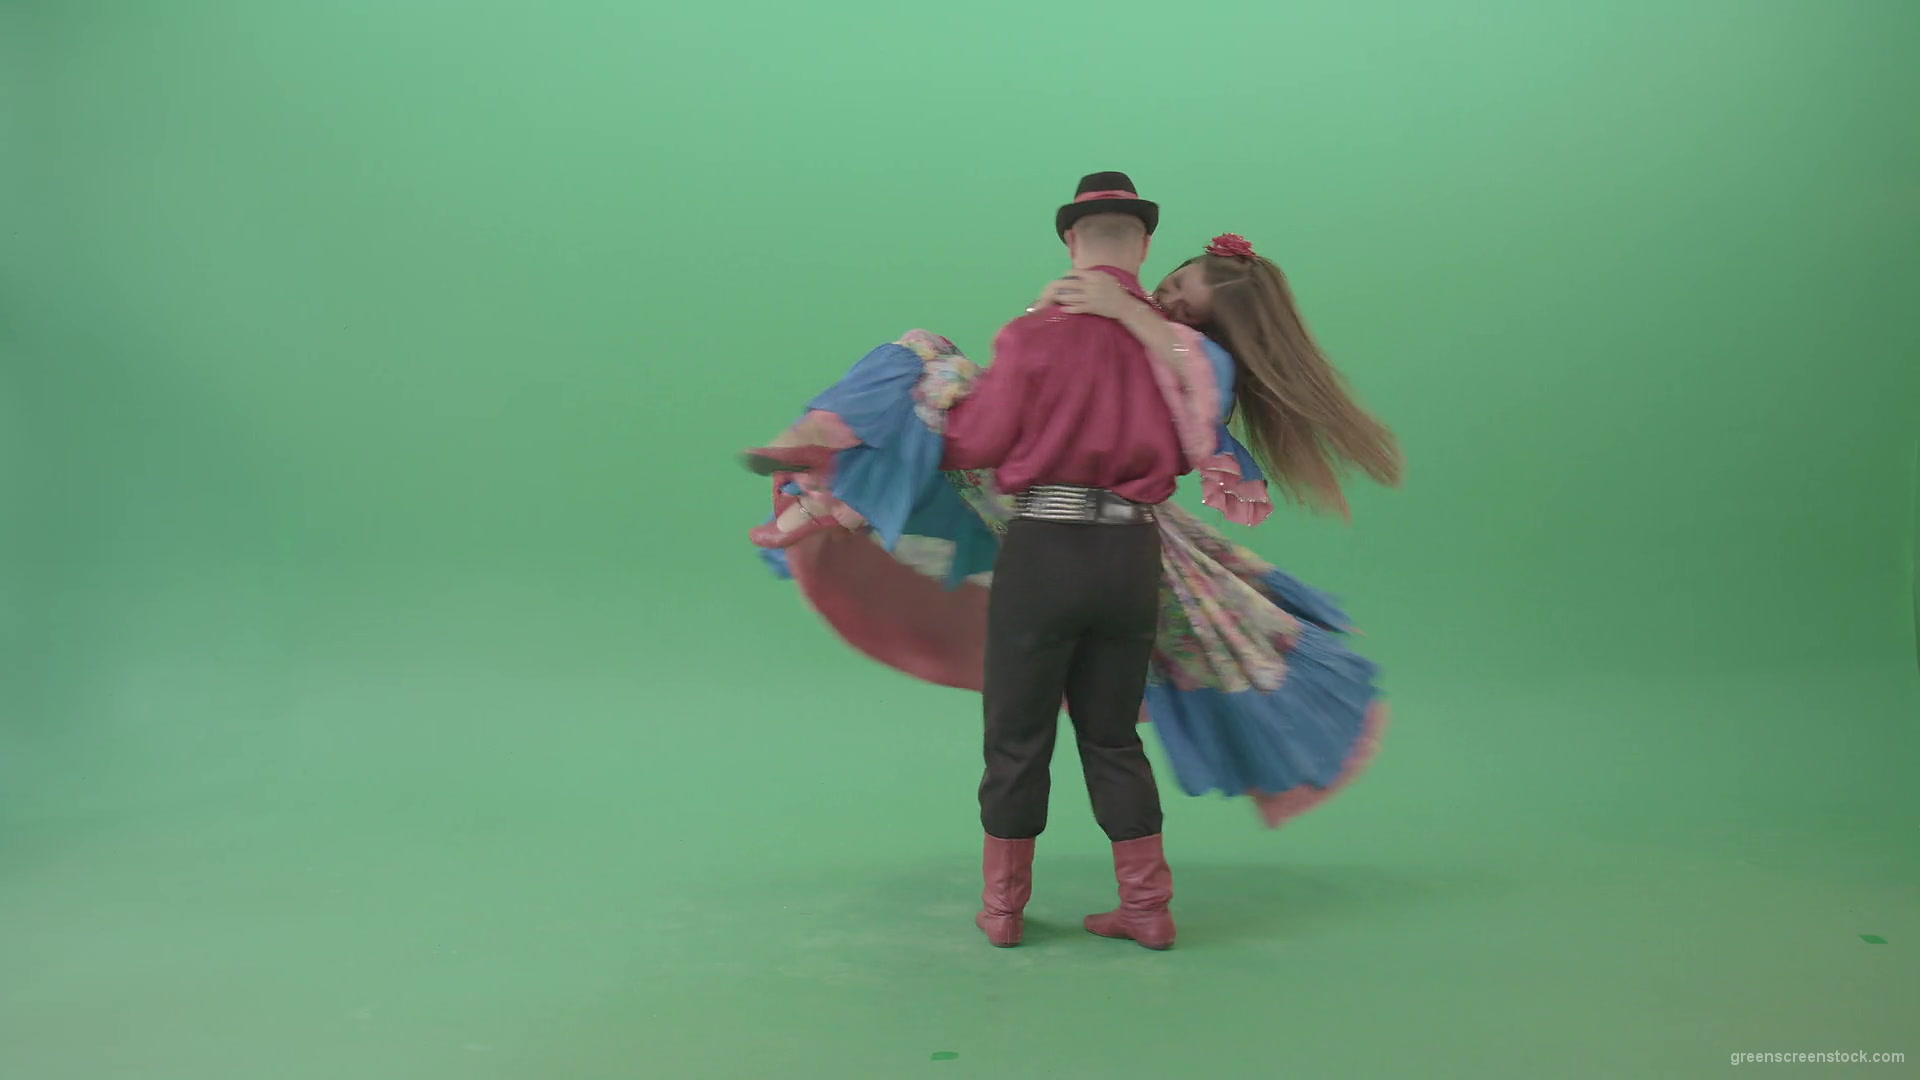 Gypsy-man-and-woman-spinning-dancing-over-green-screen-4K-video-footage-1920_007 Green Screen Stock